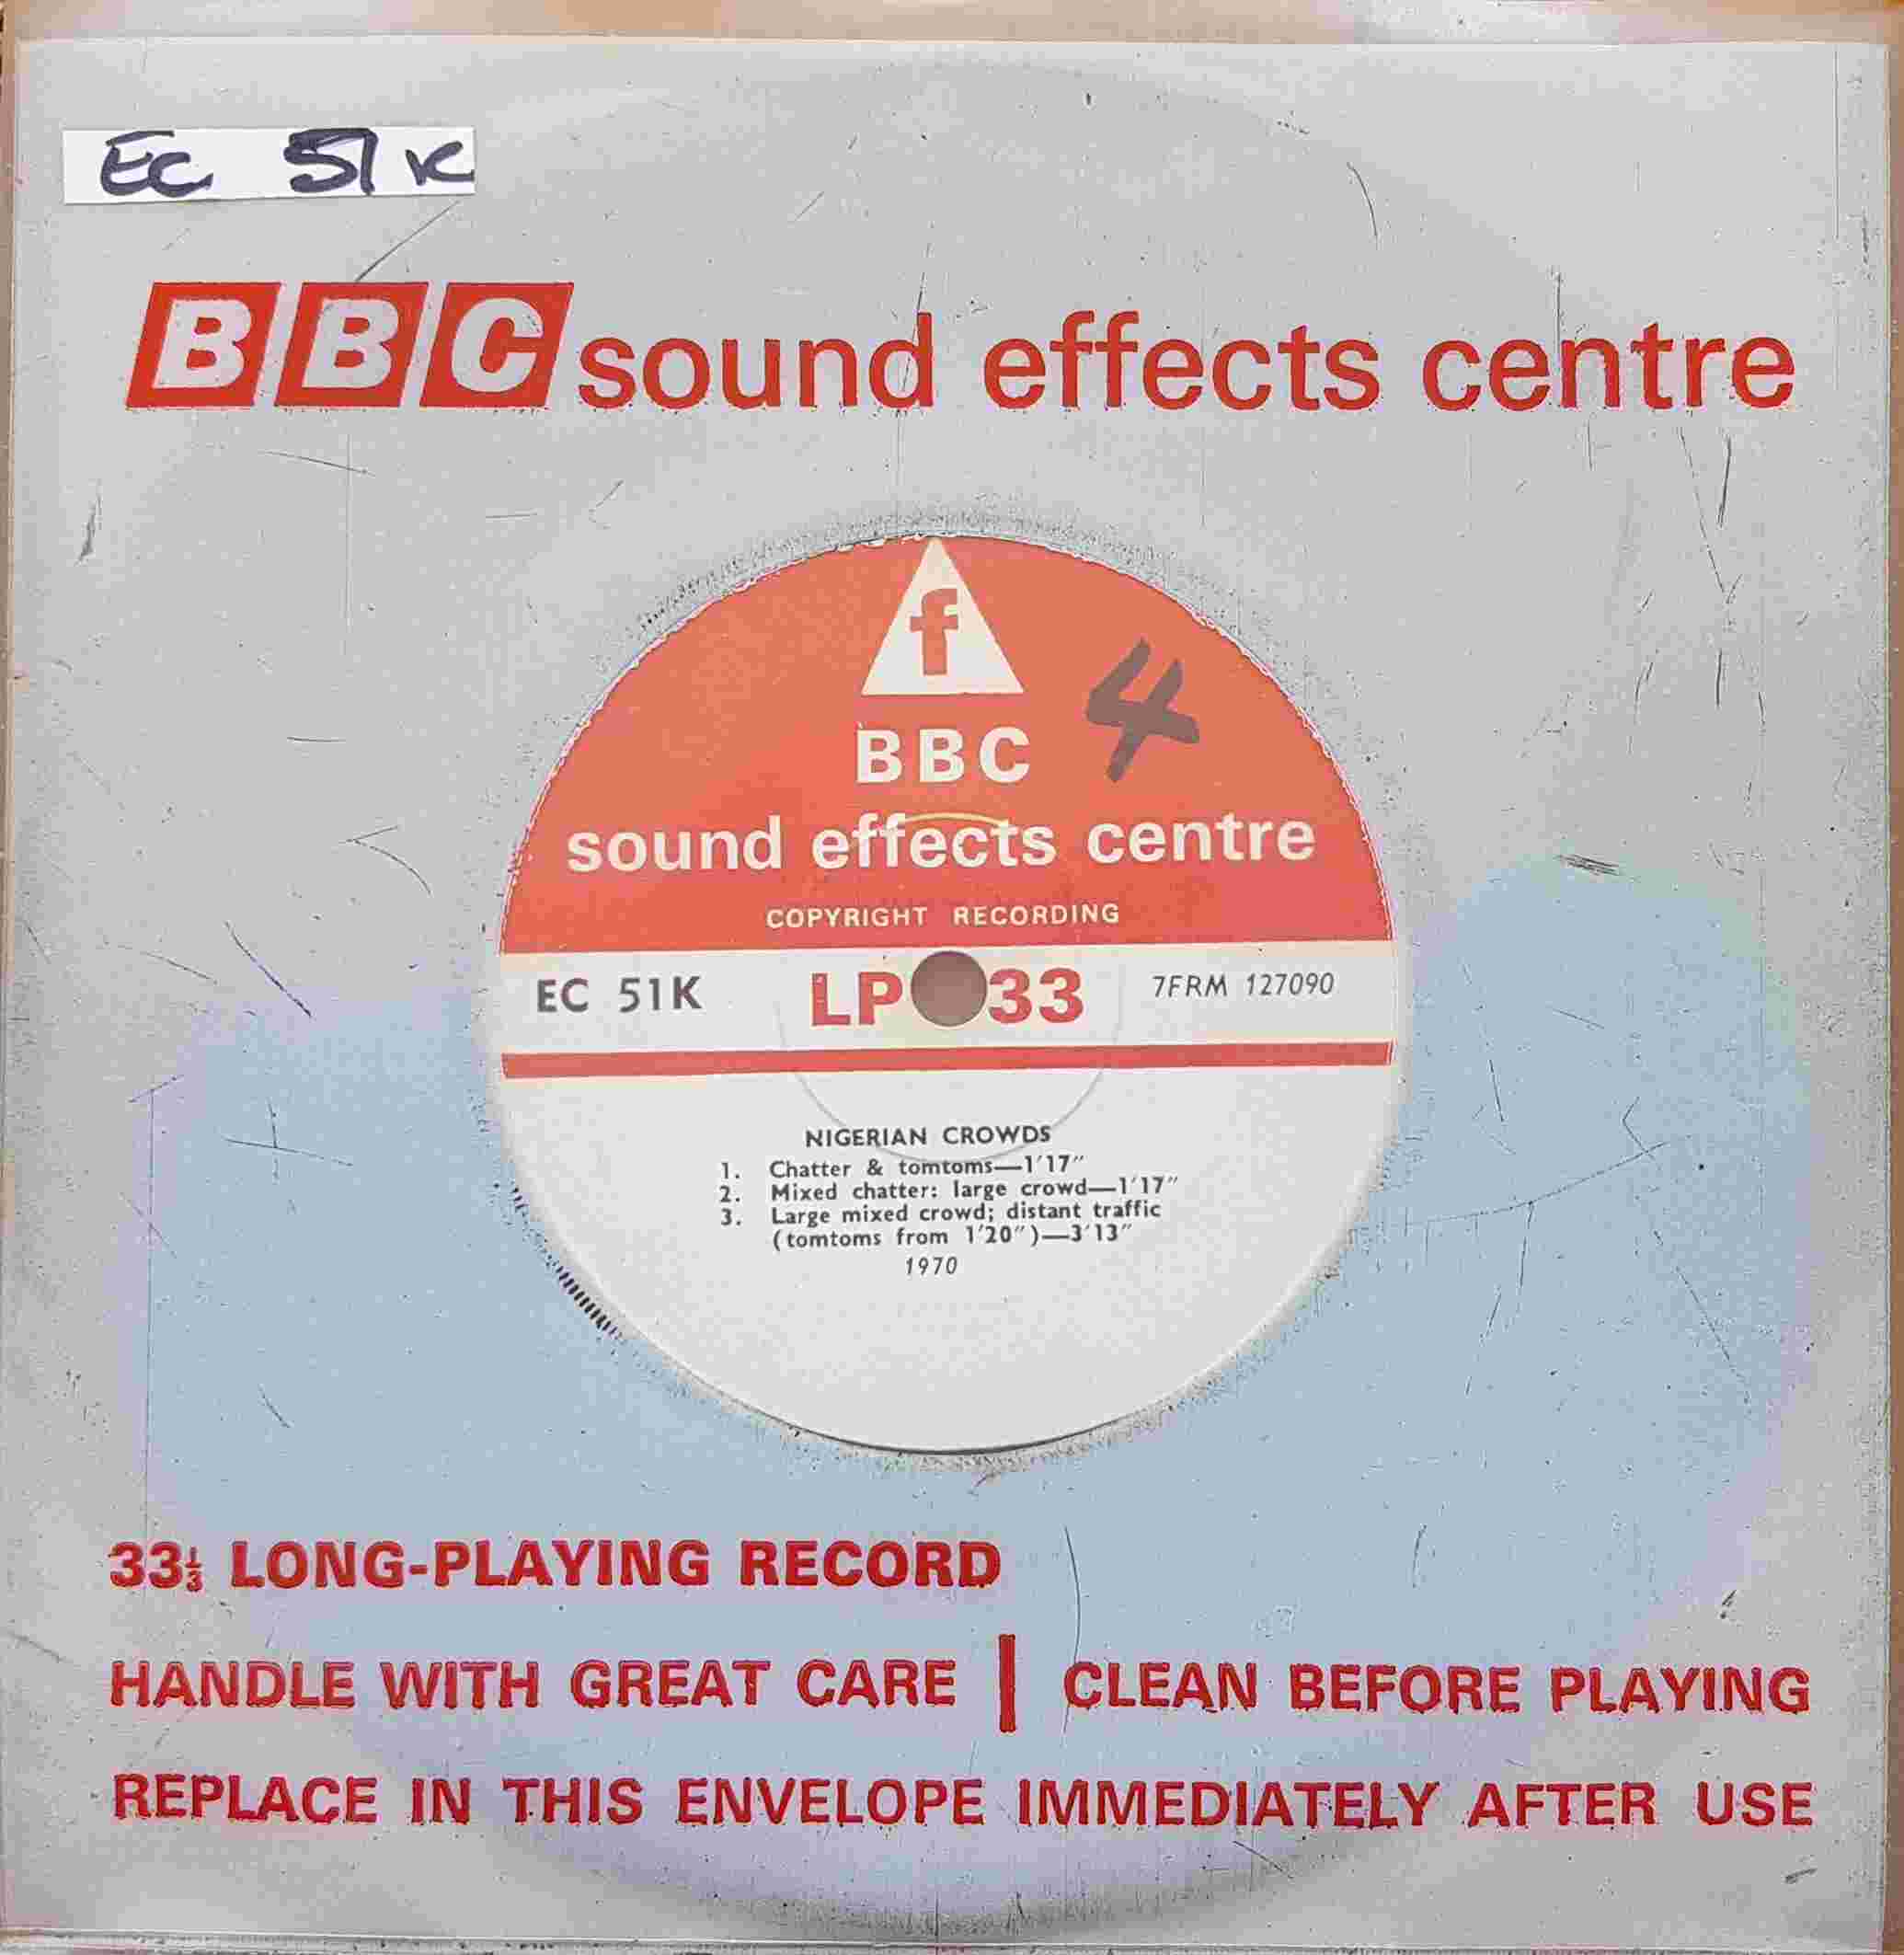 Picture of EC 51K Nigerian crowds by artist Not registered from the BBC singles - Records and Tapes library